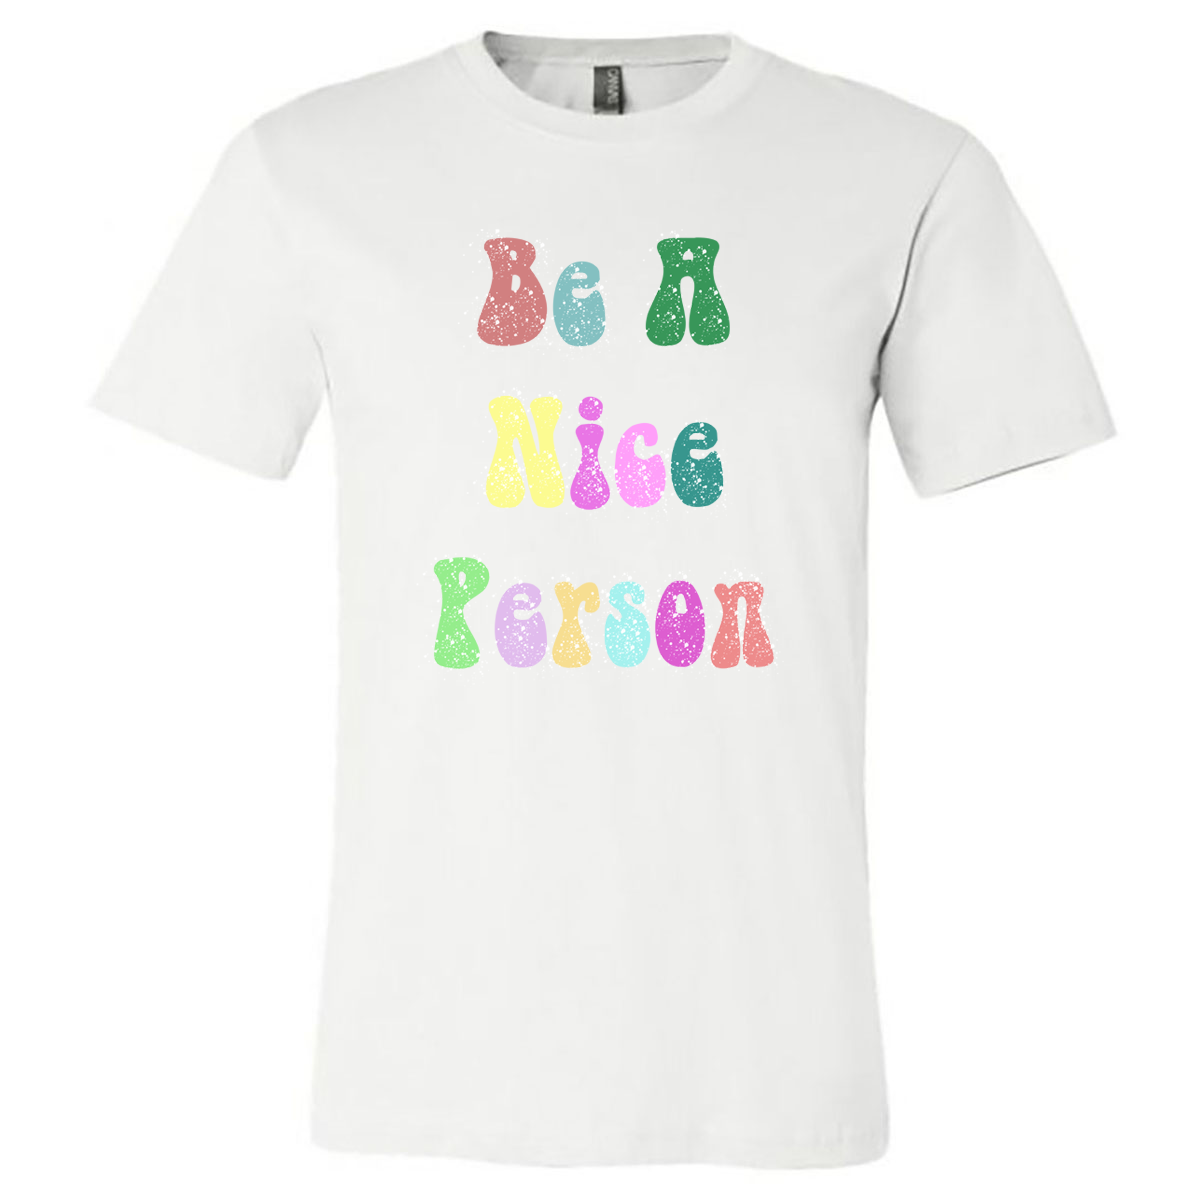 Be a Nice Person (White Tee) - Southern Grace Creations